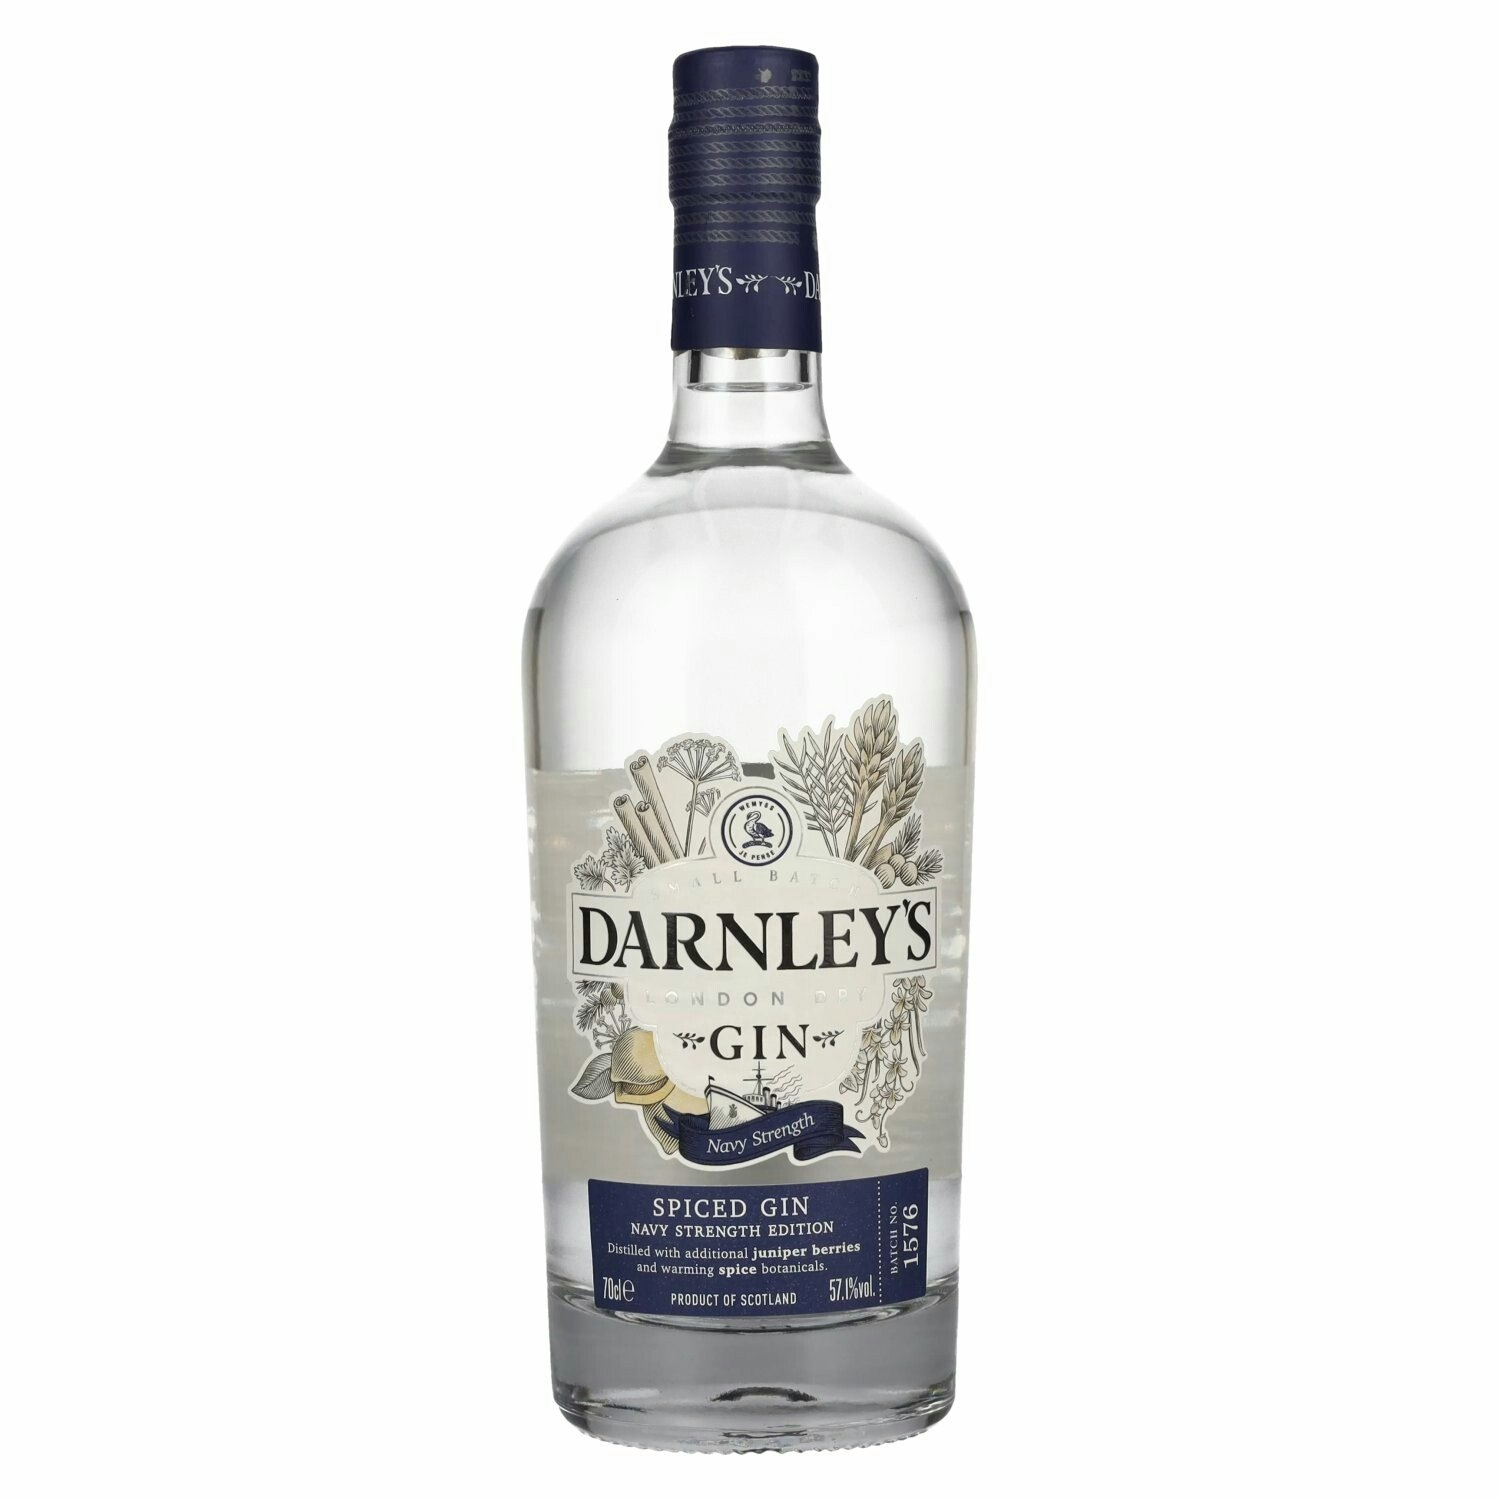 Darnley's Gin SPICED GIN Navy Strength Edition 57,1% Vol. 0,7l